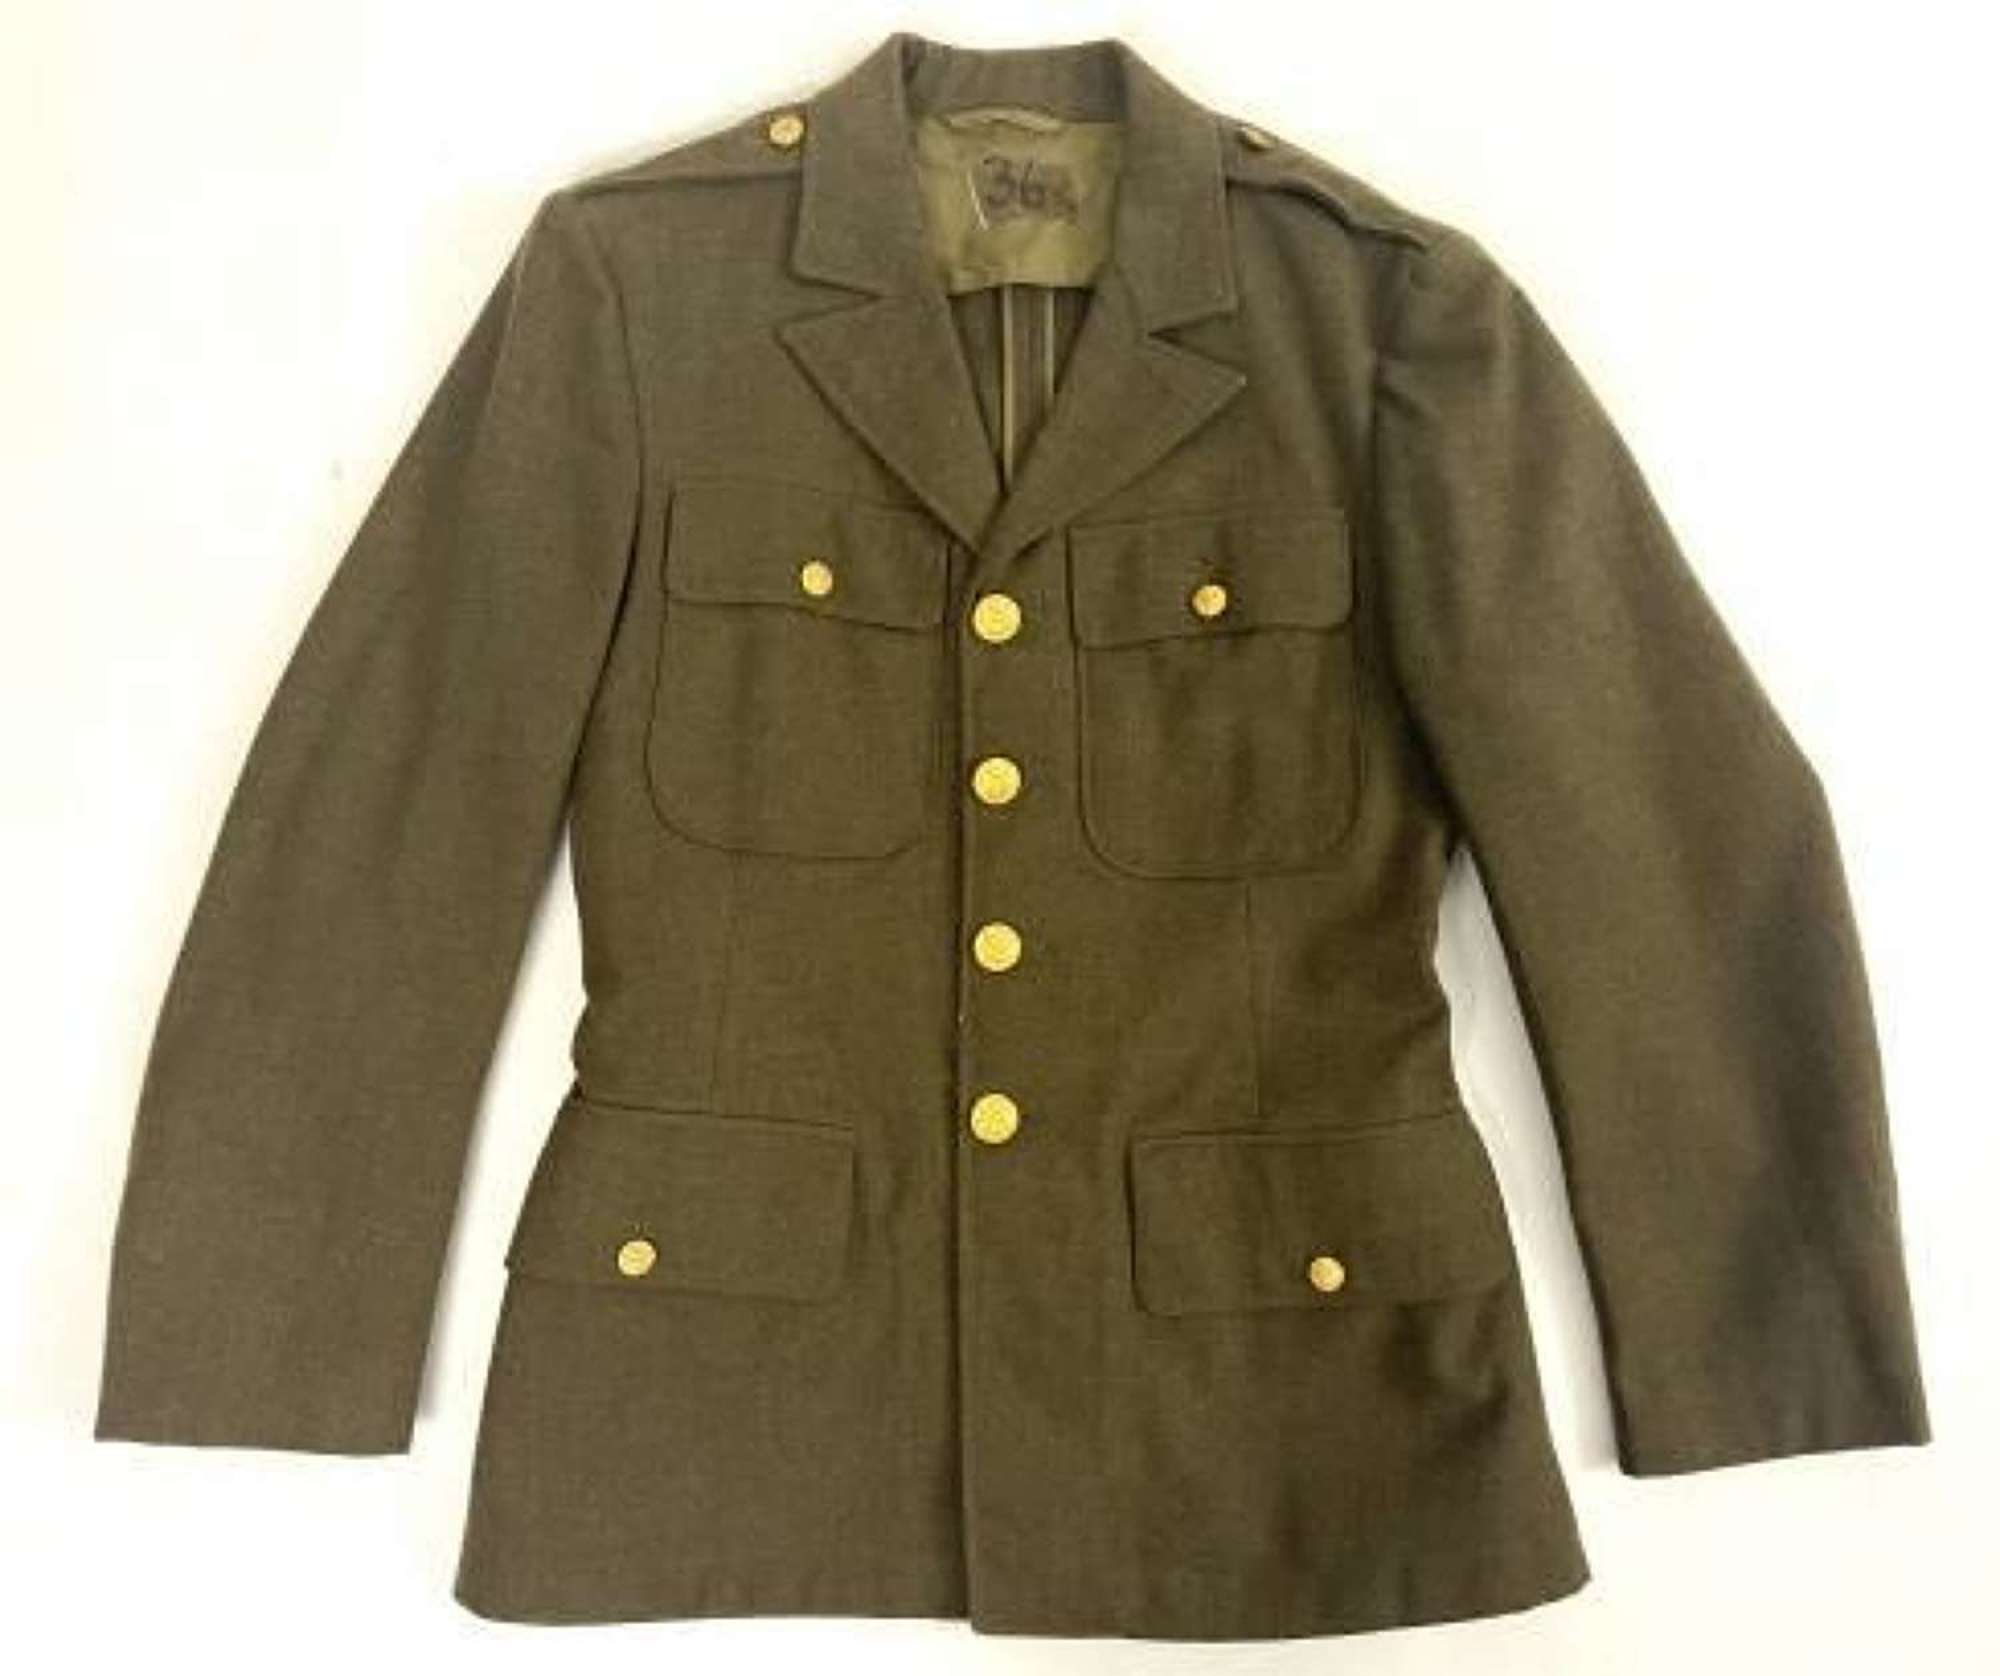 Original 1940 Dated US Enlisted Men's Tunic - Size 36